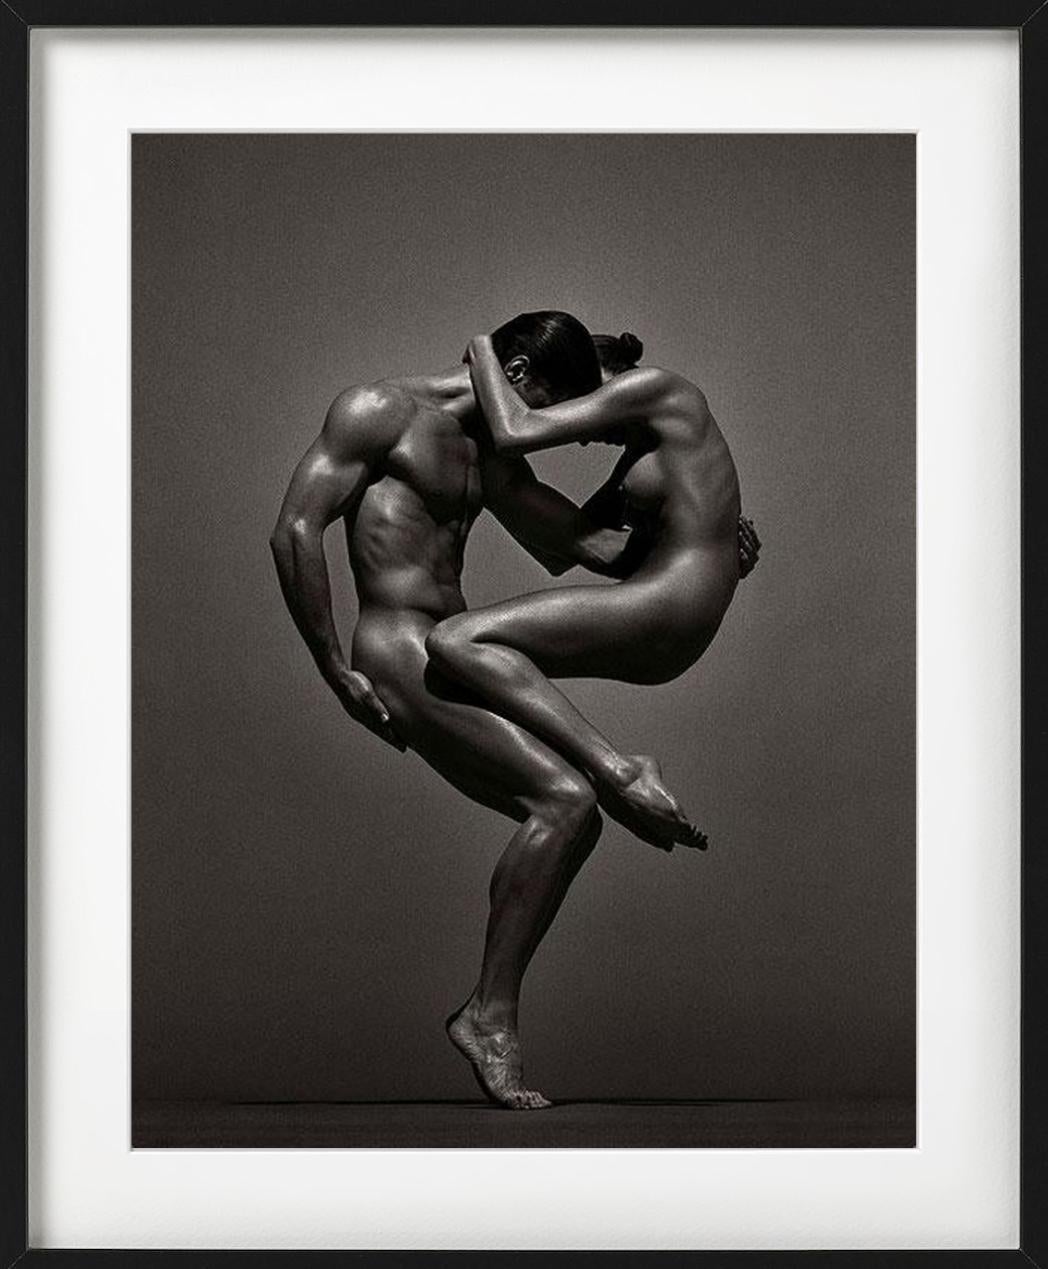 Sina&Anthony, Vienna - douple nude in athletic pose, fine art photography, 1995 - Contemporary Photograph by Andreas H. Bitesnich